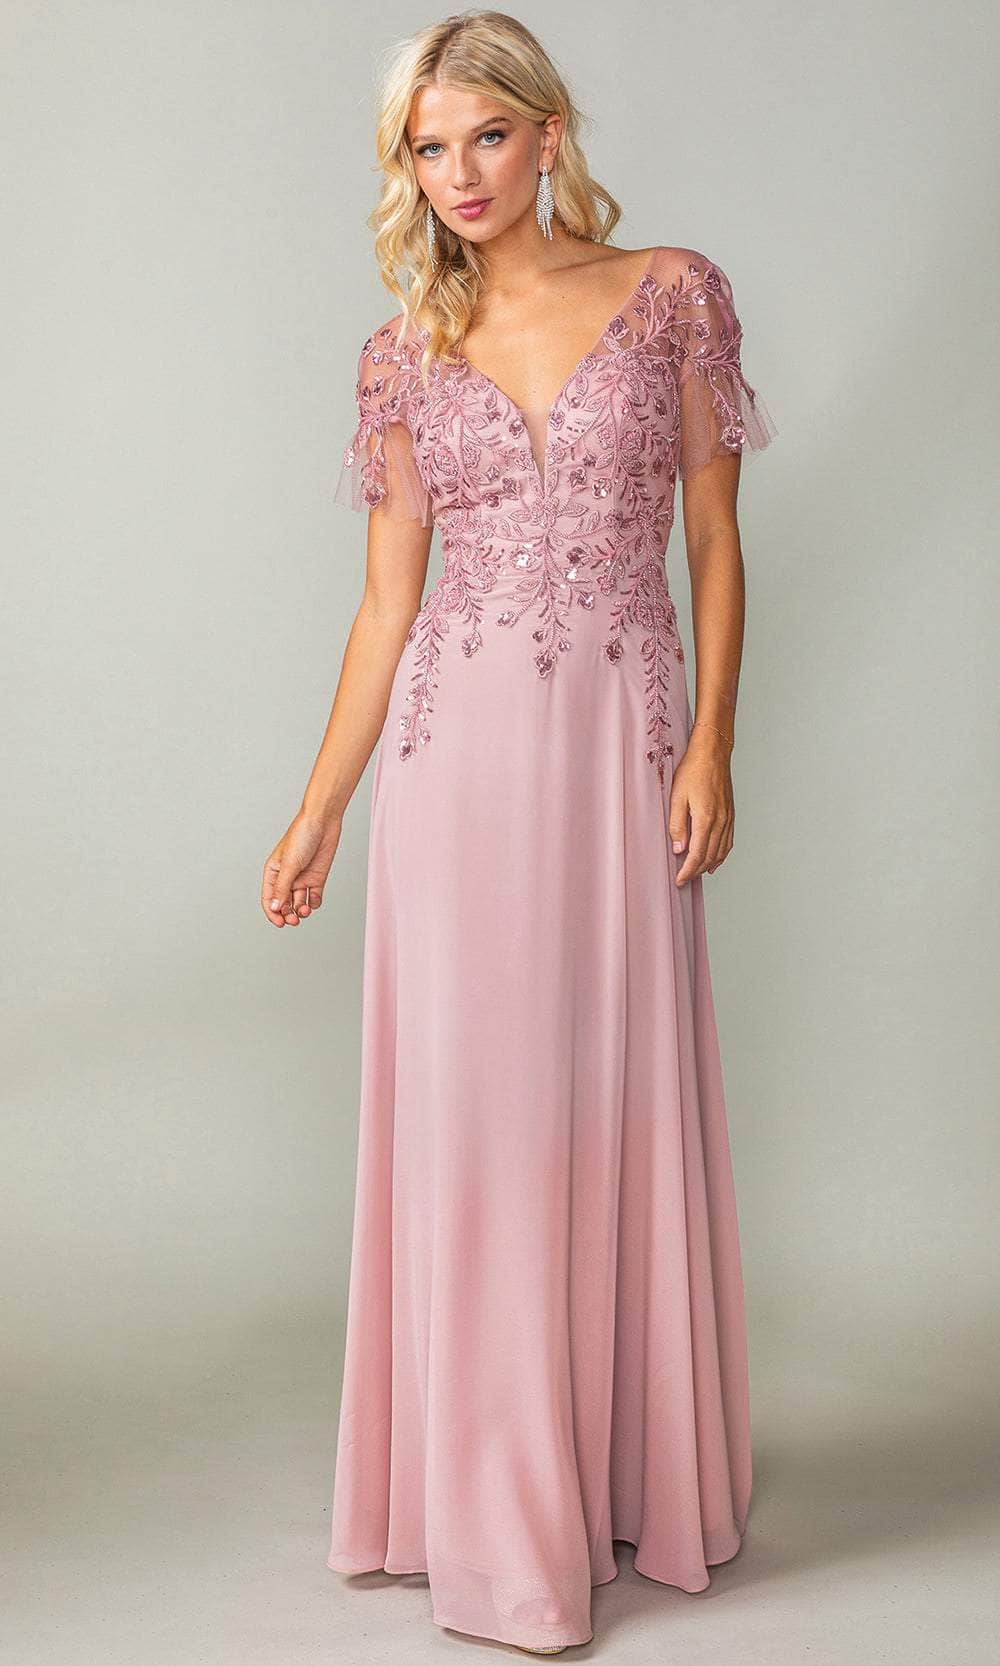 Image of Dancing Queen 4378 - Sheer Sleeve Embroidered Prom Dress